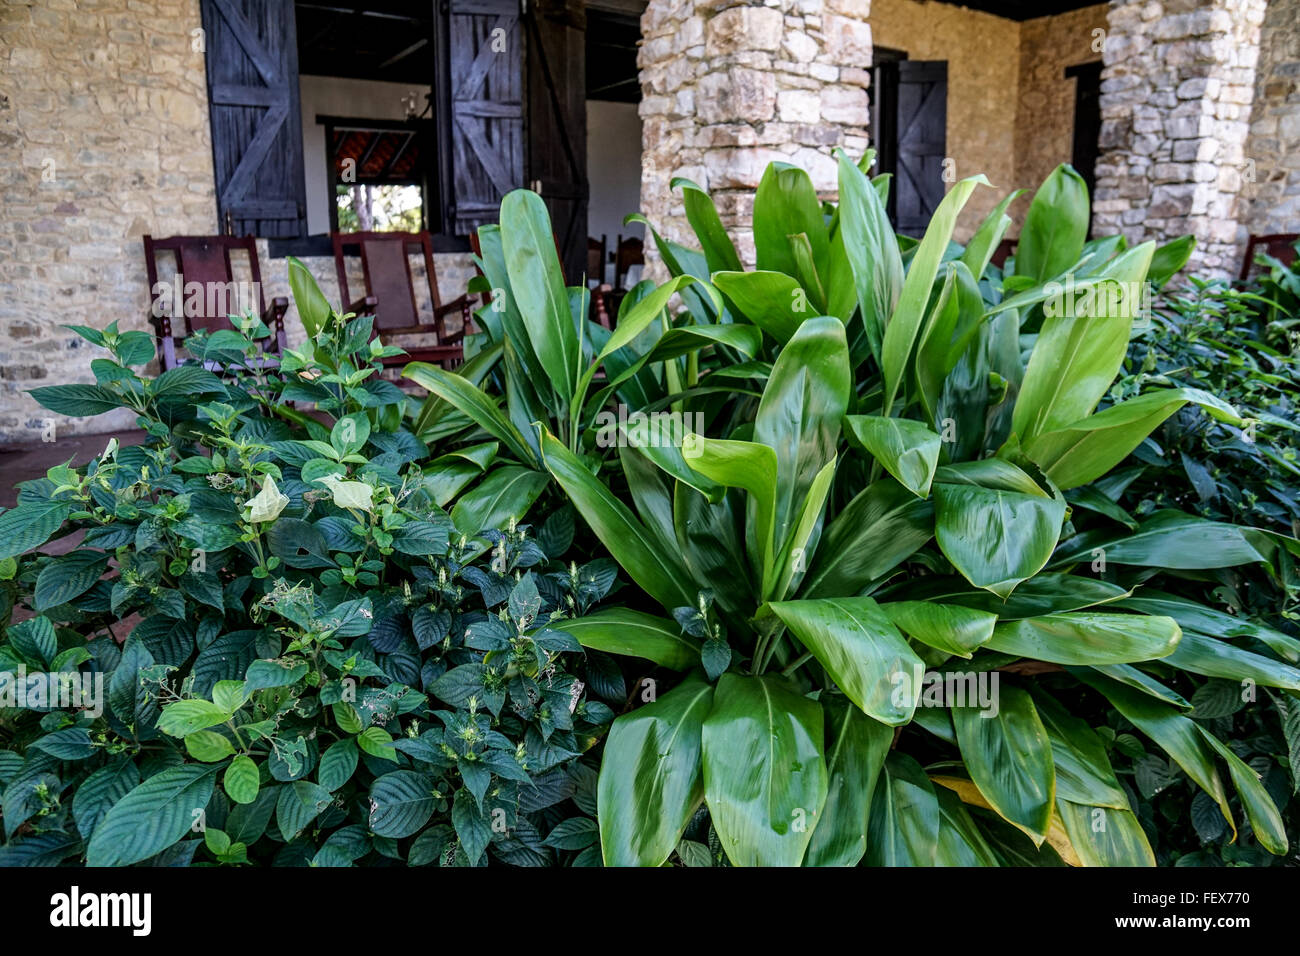 Porch and green plants with rocking chair Stock Photo